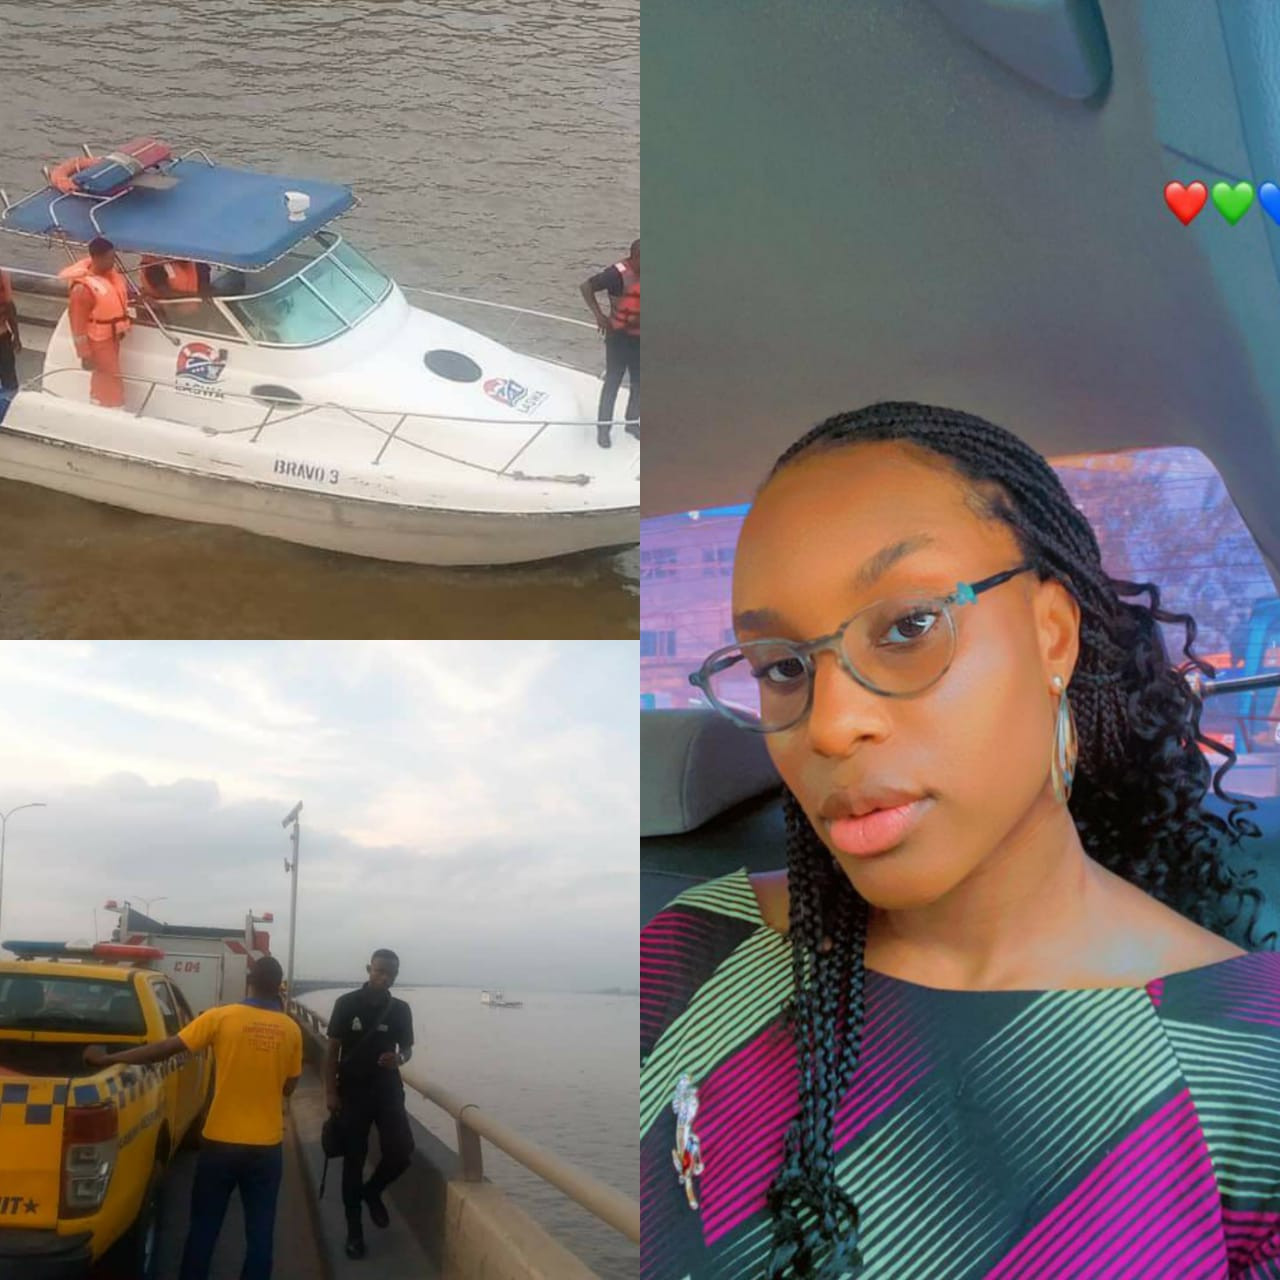 LASEMA TEMPORARILY SUSPENDS SEARCH AND RESCUE OPERATION FOR BRIDE-TO-BE WHO JUMPED INTO LAGOS LAGOON